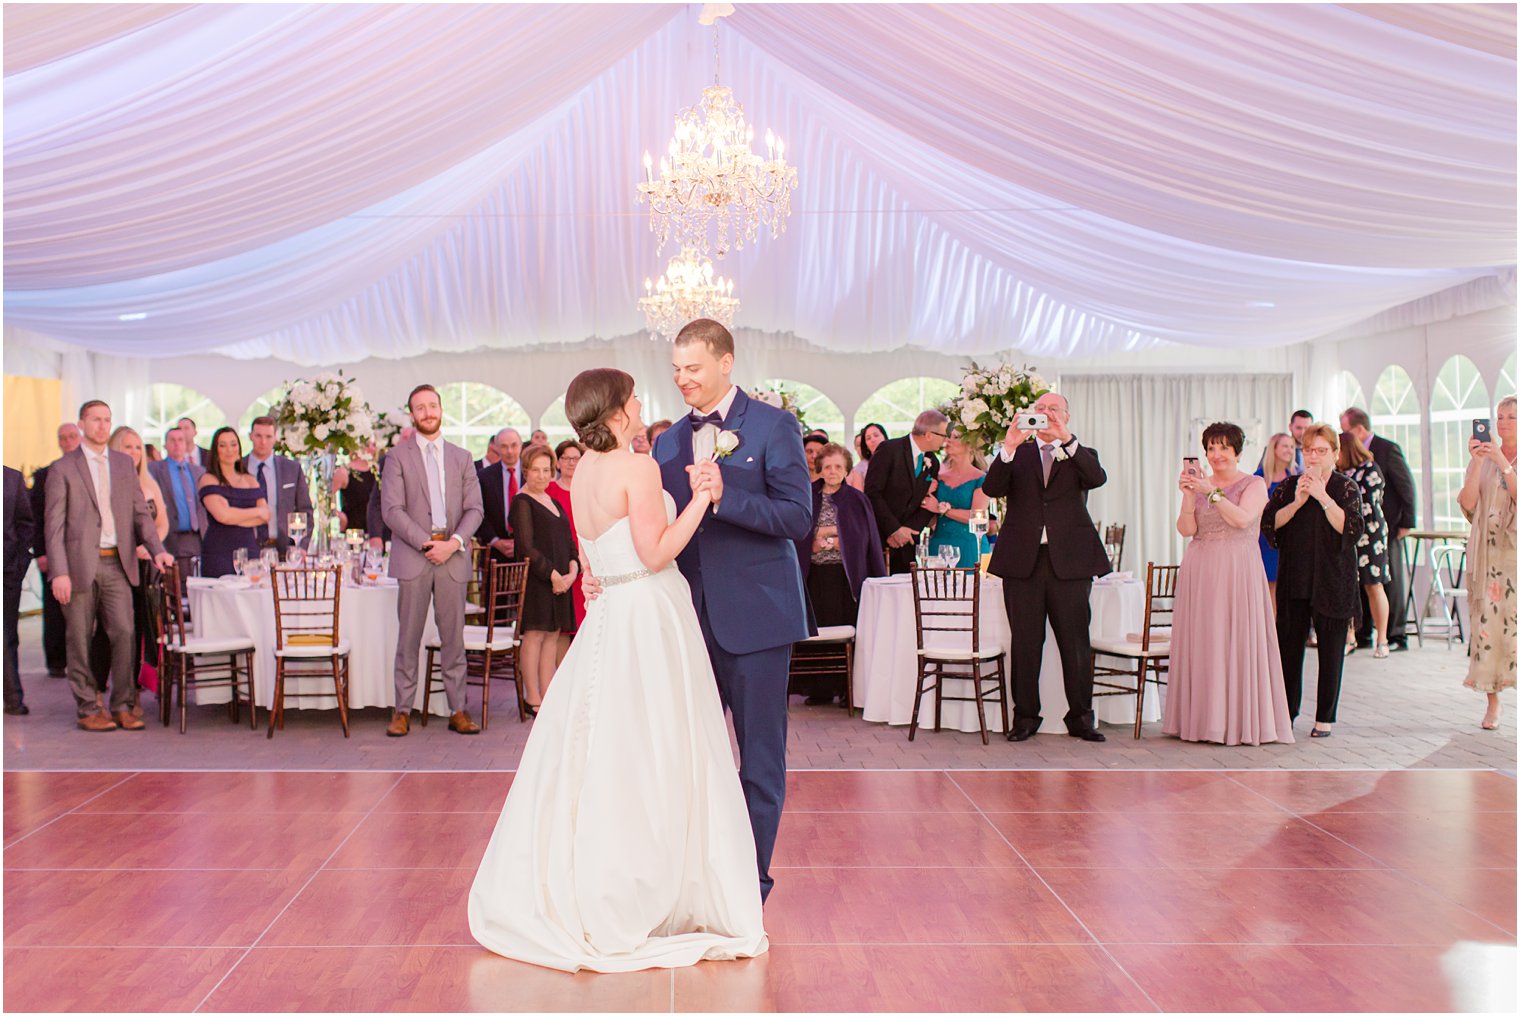 First dance photo at Windows on the Water at Frogbridge in Millstone NJ